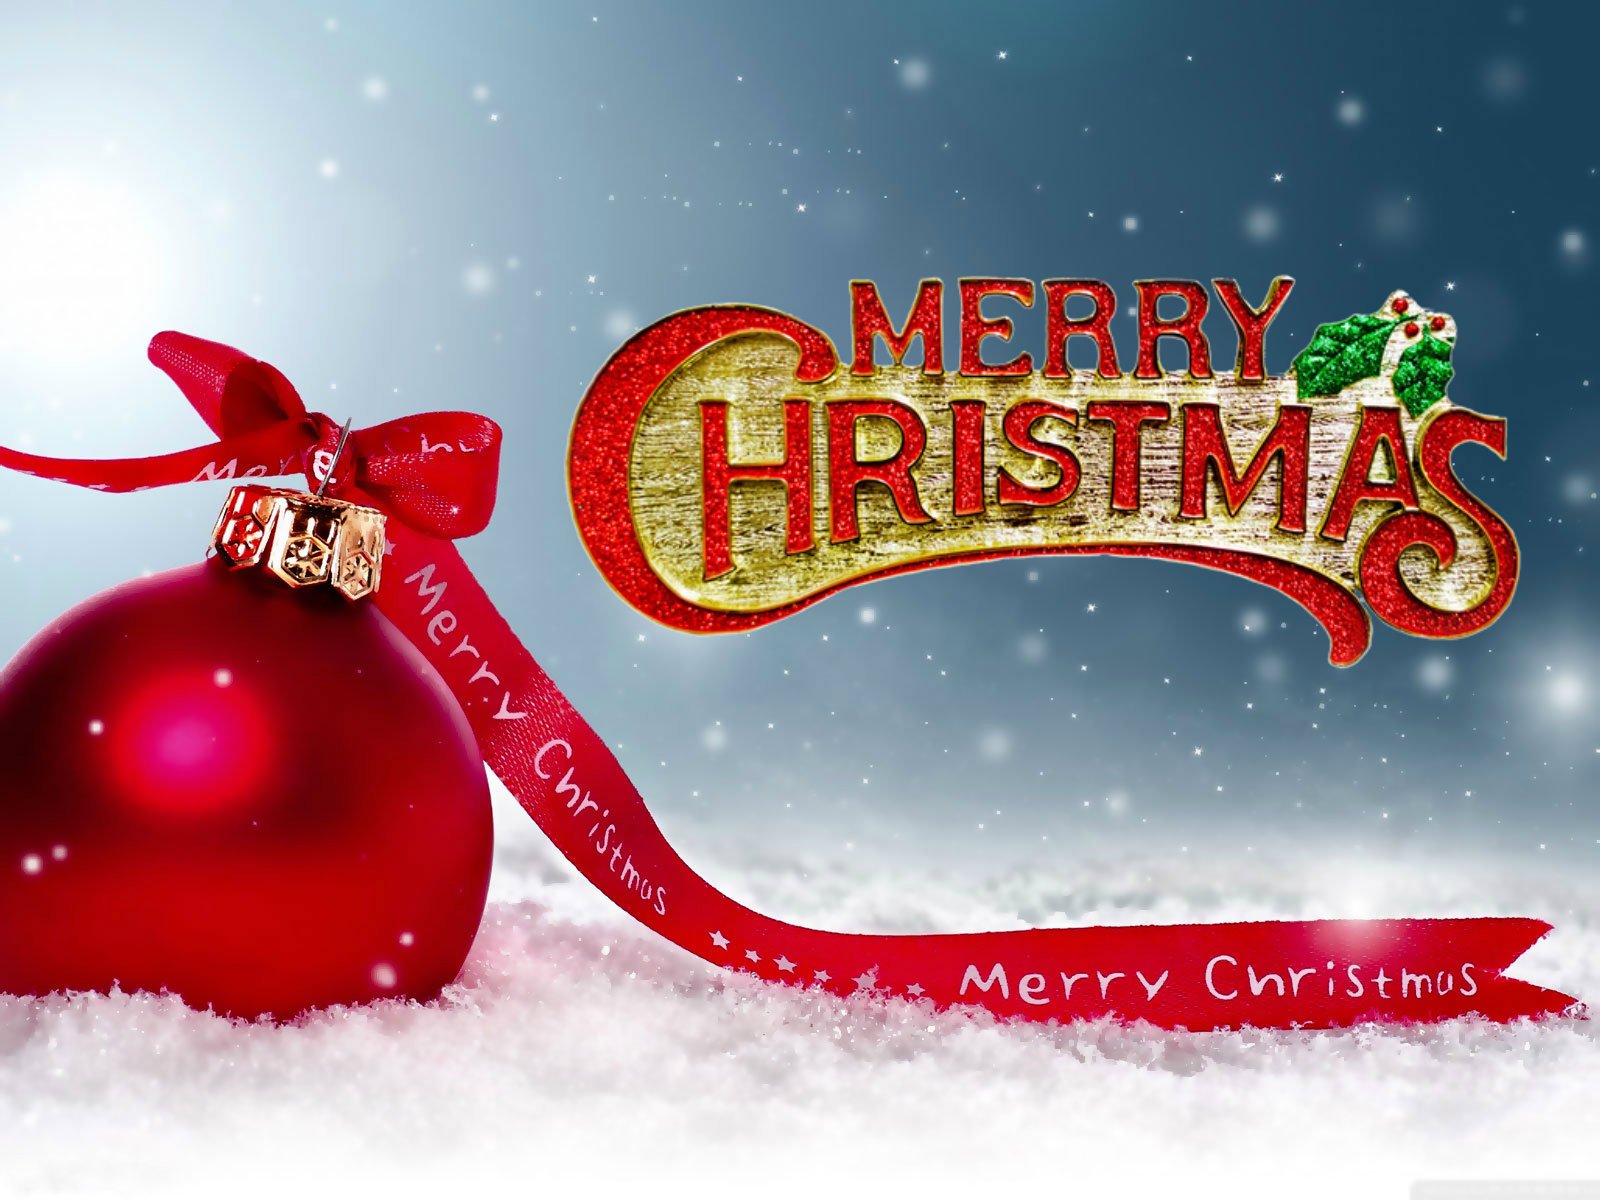 Merry Christmas 2018 Wishes Quotes Images Wallpapers For